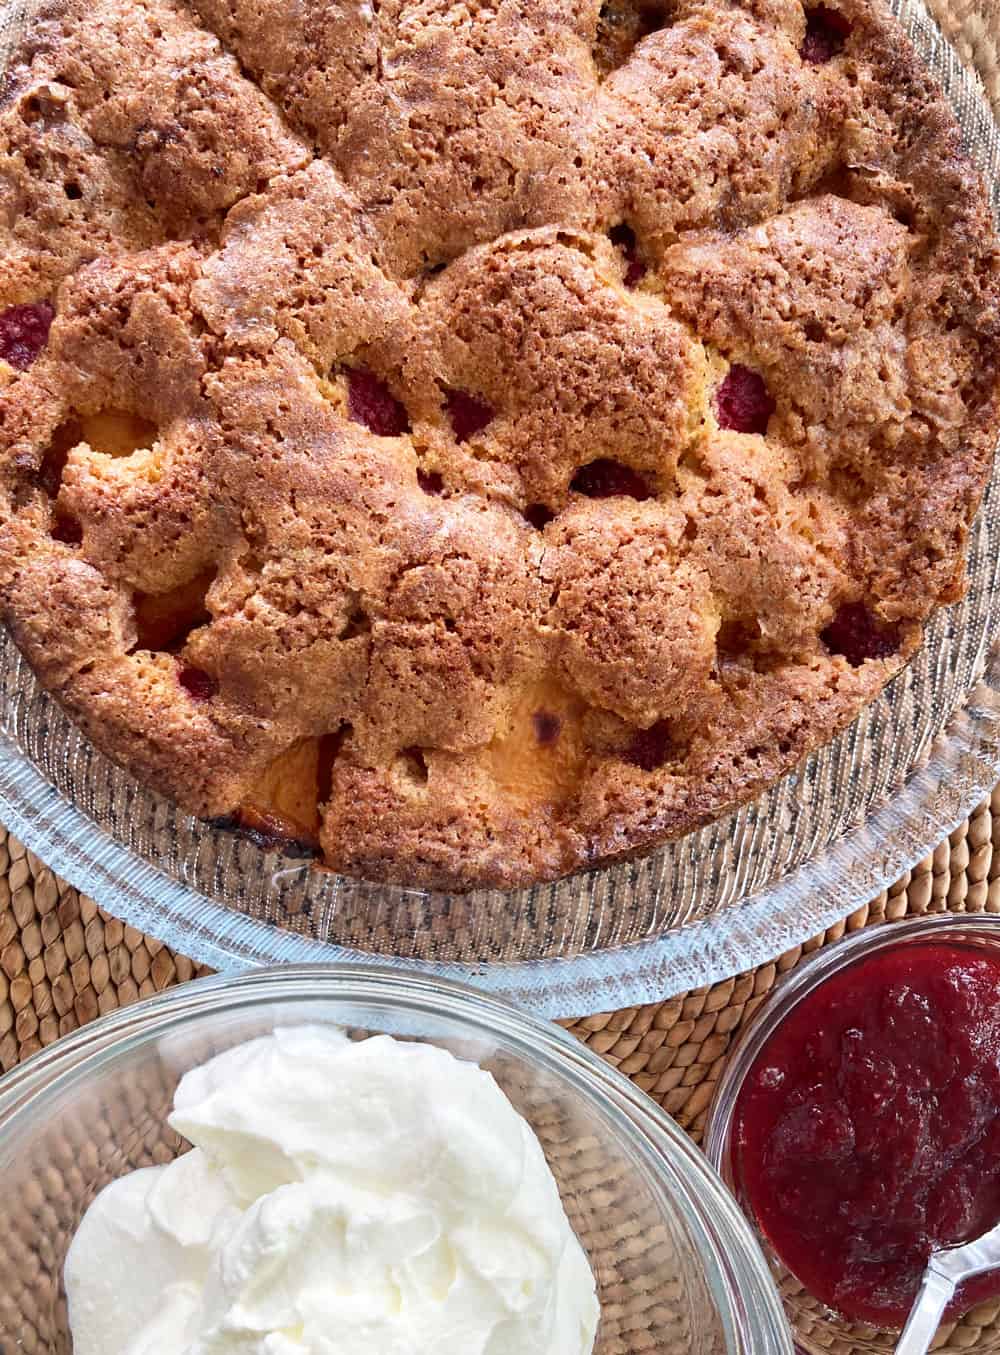 Summer Fruit Cornmeal Cake with whipped cream and fruit sauce on the side e